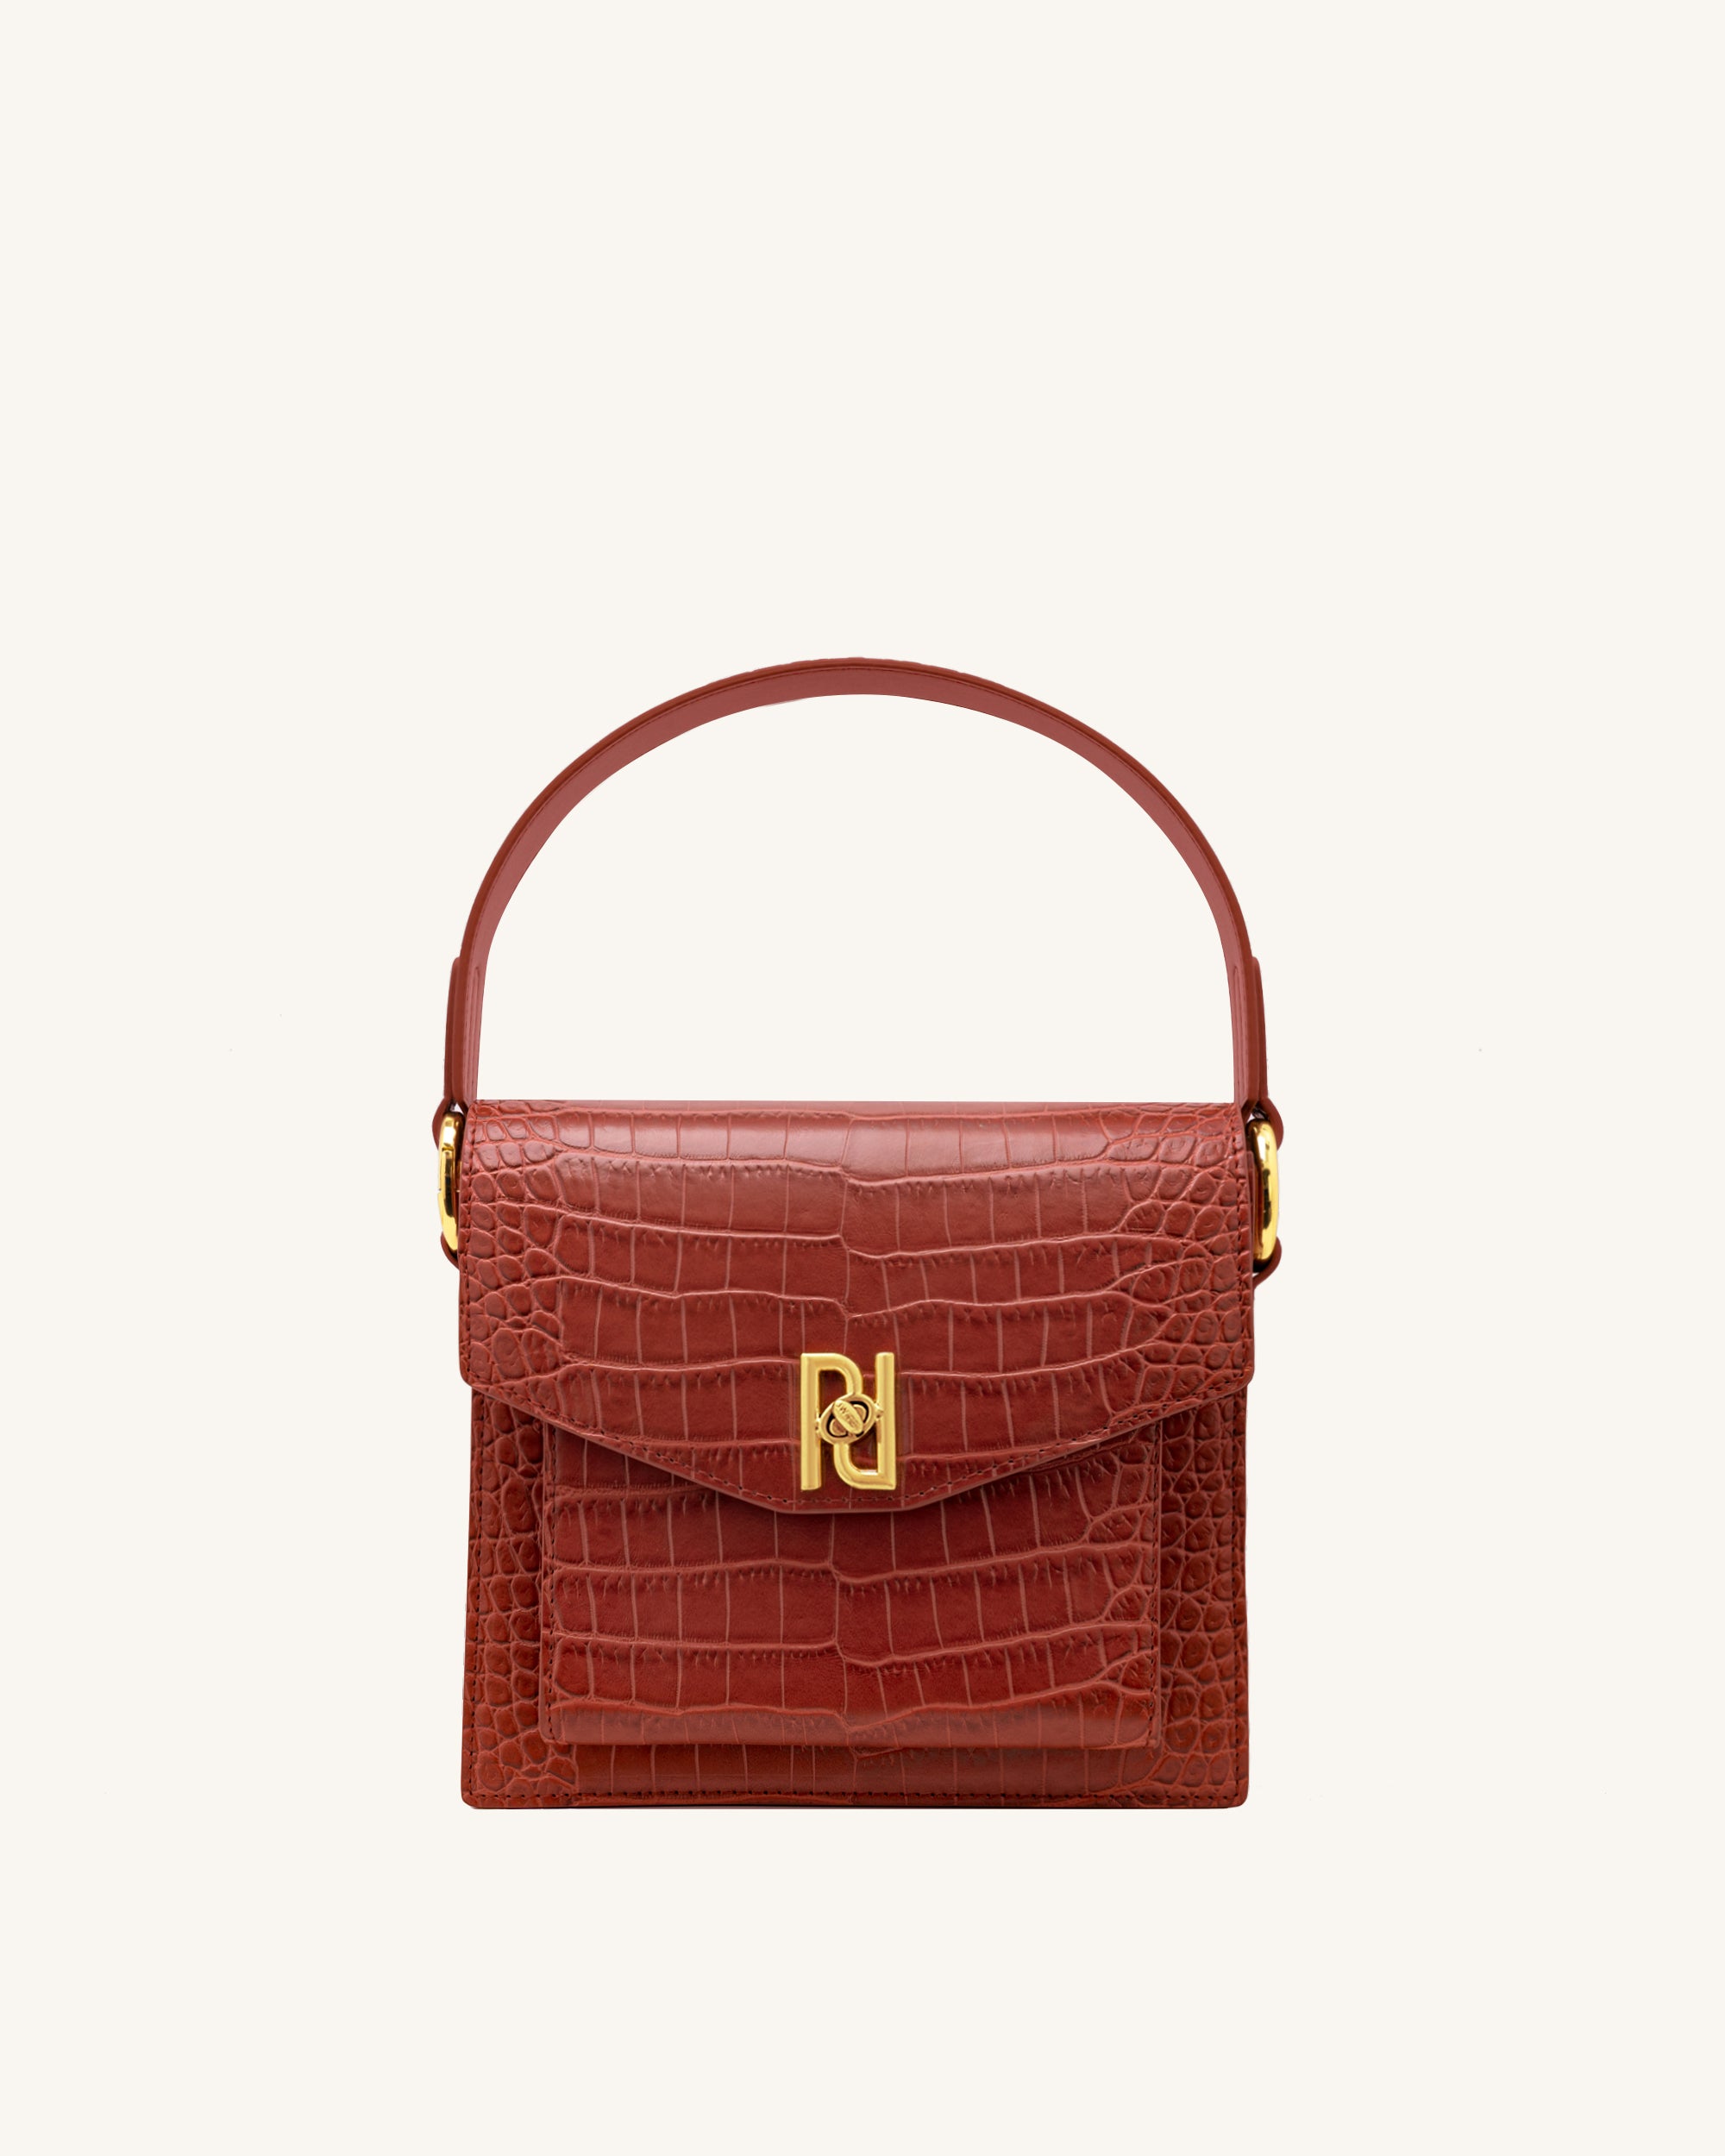 J.Crew Vienna Lady Bag In Patent Leather in Red